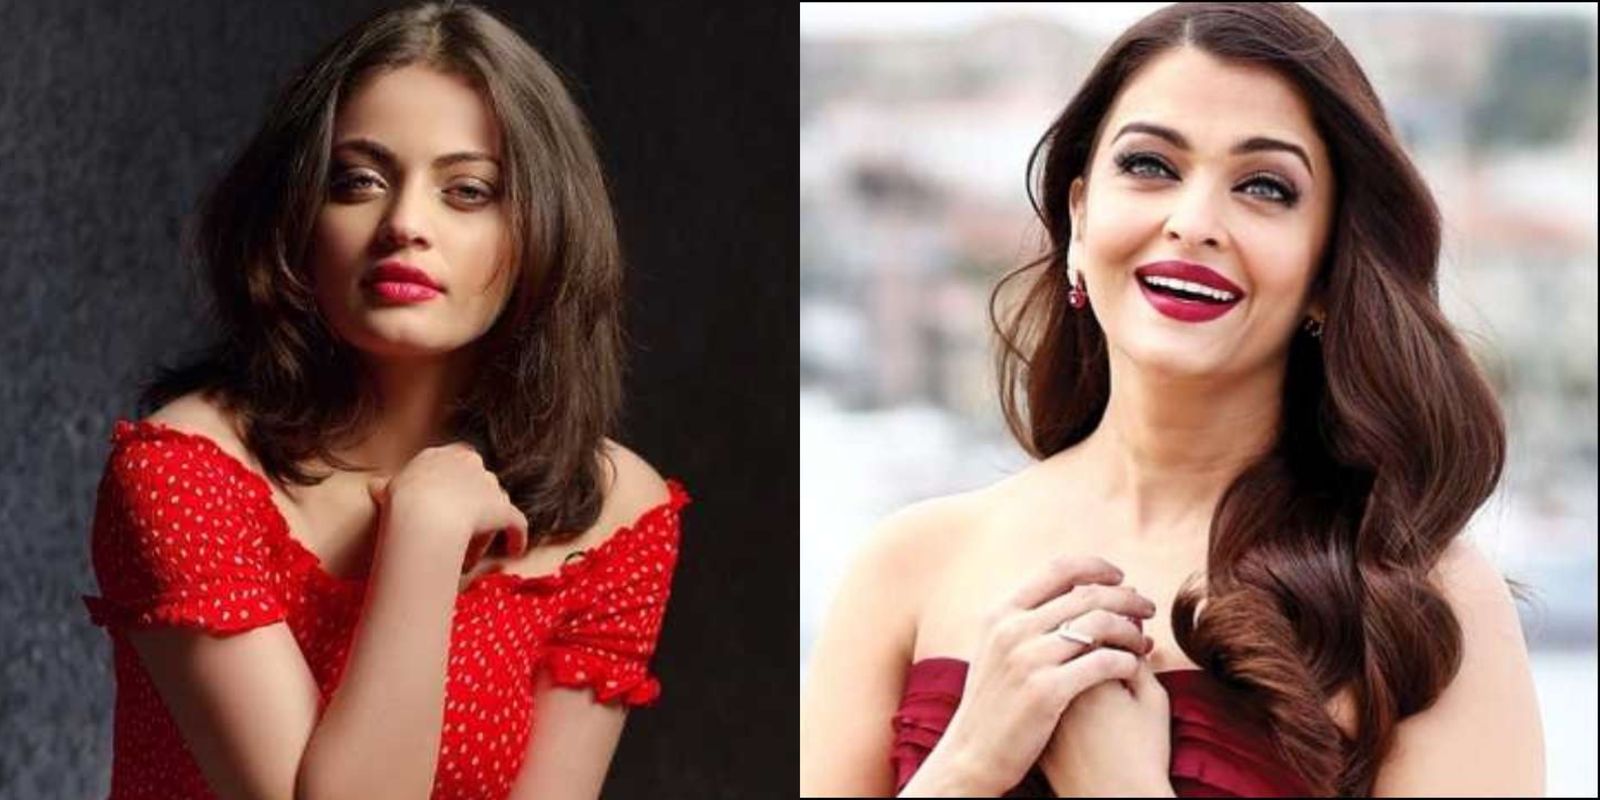 Salman Khan’s ‘Lucky’ Co-Star Sneha Ullal Opens Up About Being Compared To Aishwarya Rai Bachchan